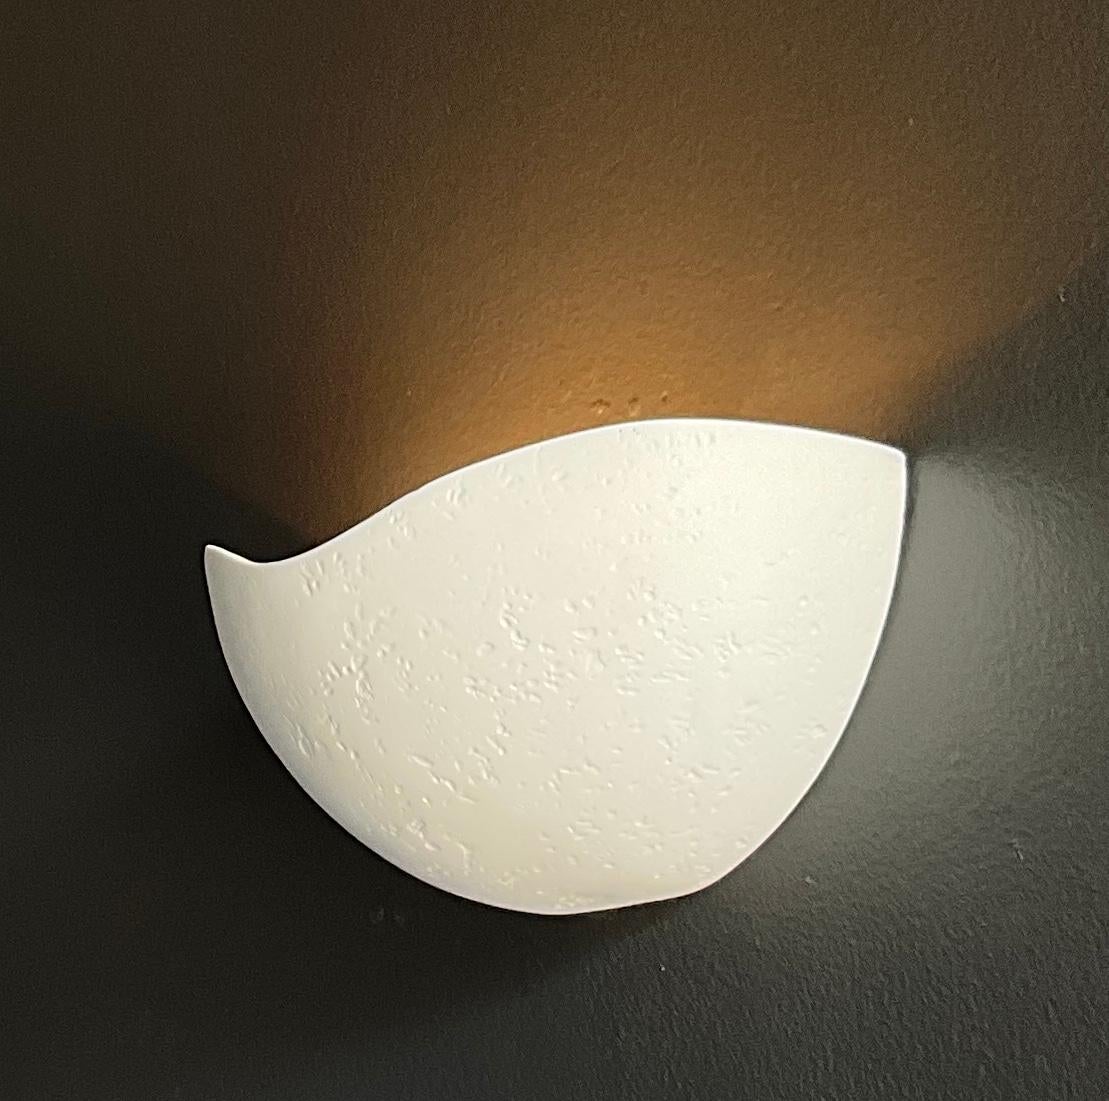 Designed to complement our St Germain chandelier, these wall sconces have a half dome shape and are handcrafted with our signature plaster of Paris finish. They provide an indirect uplight. A gold leaf or a pure white interior can be specified. The